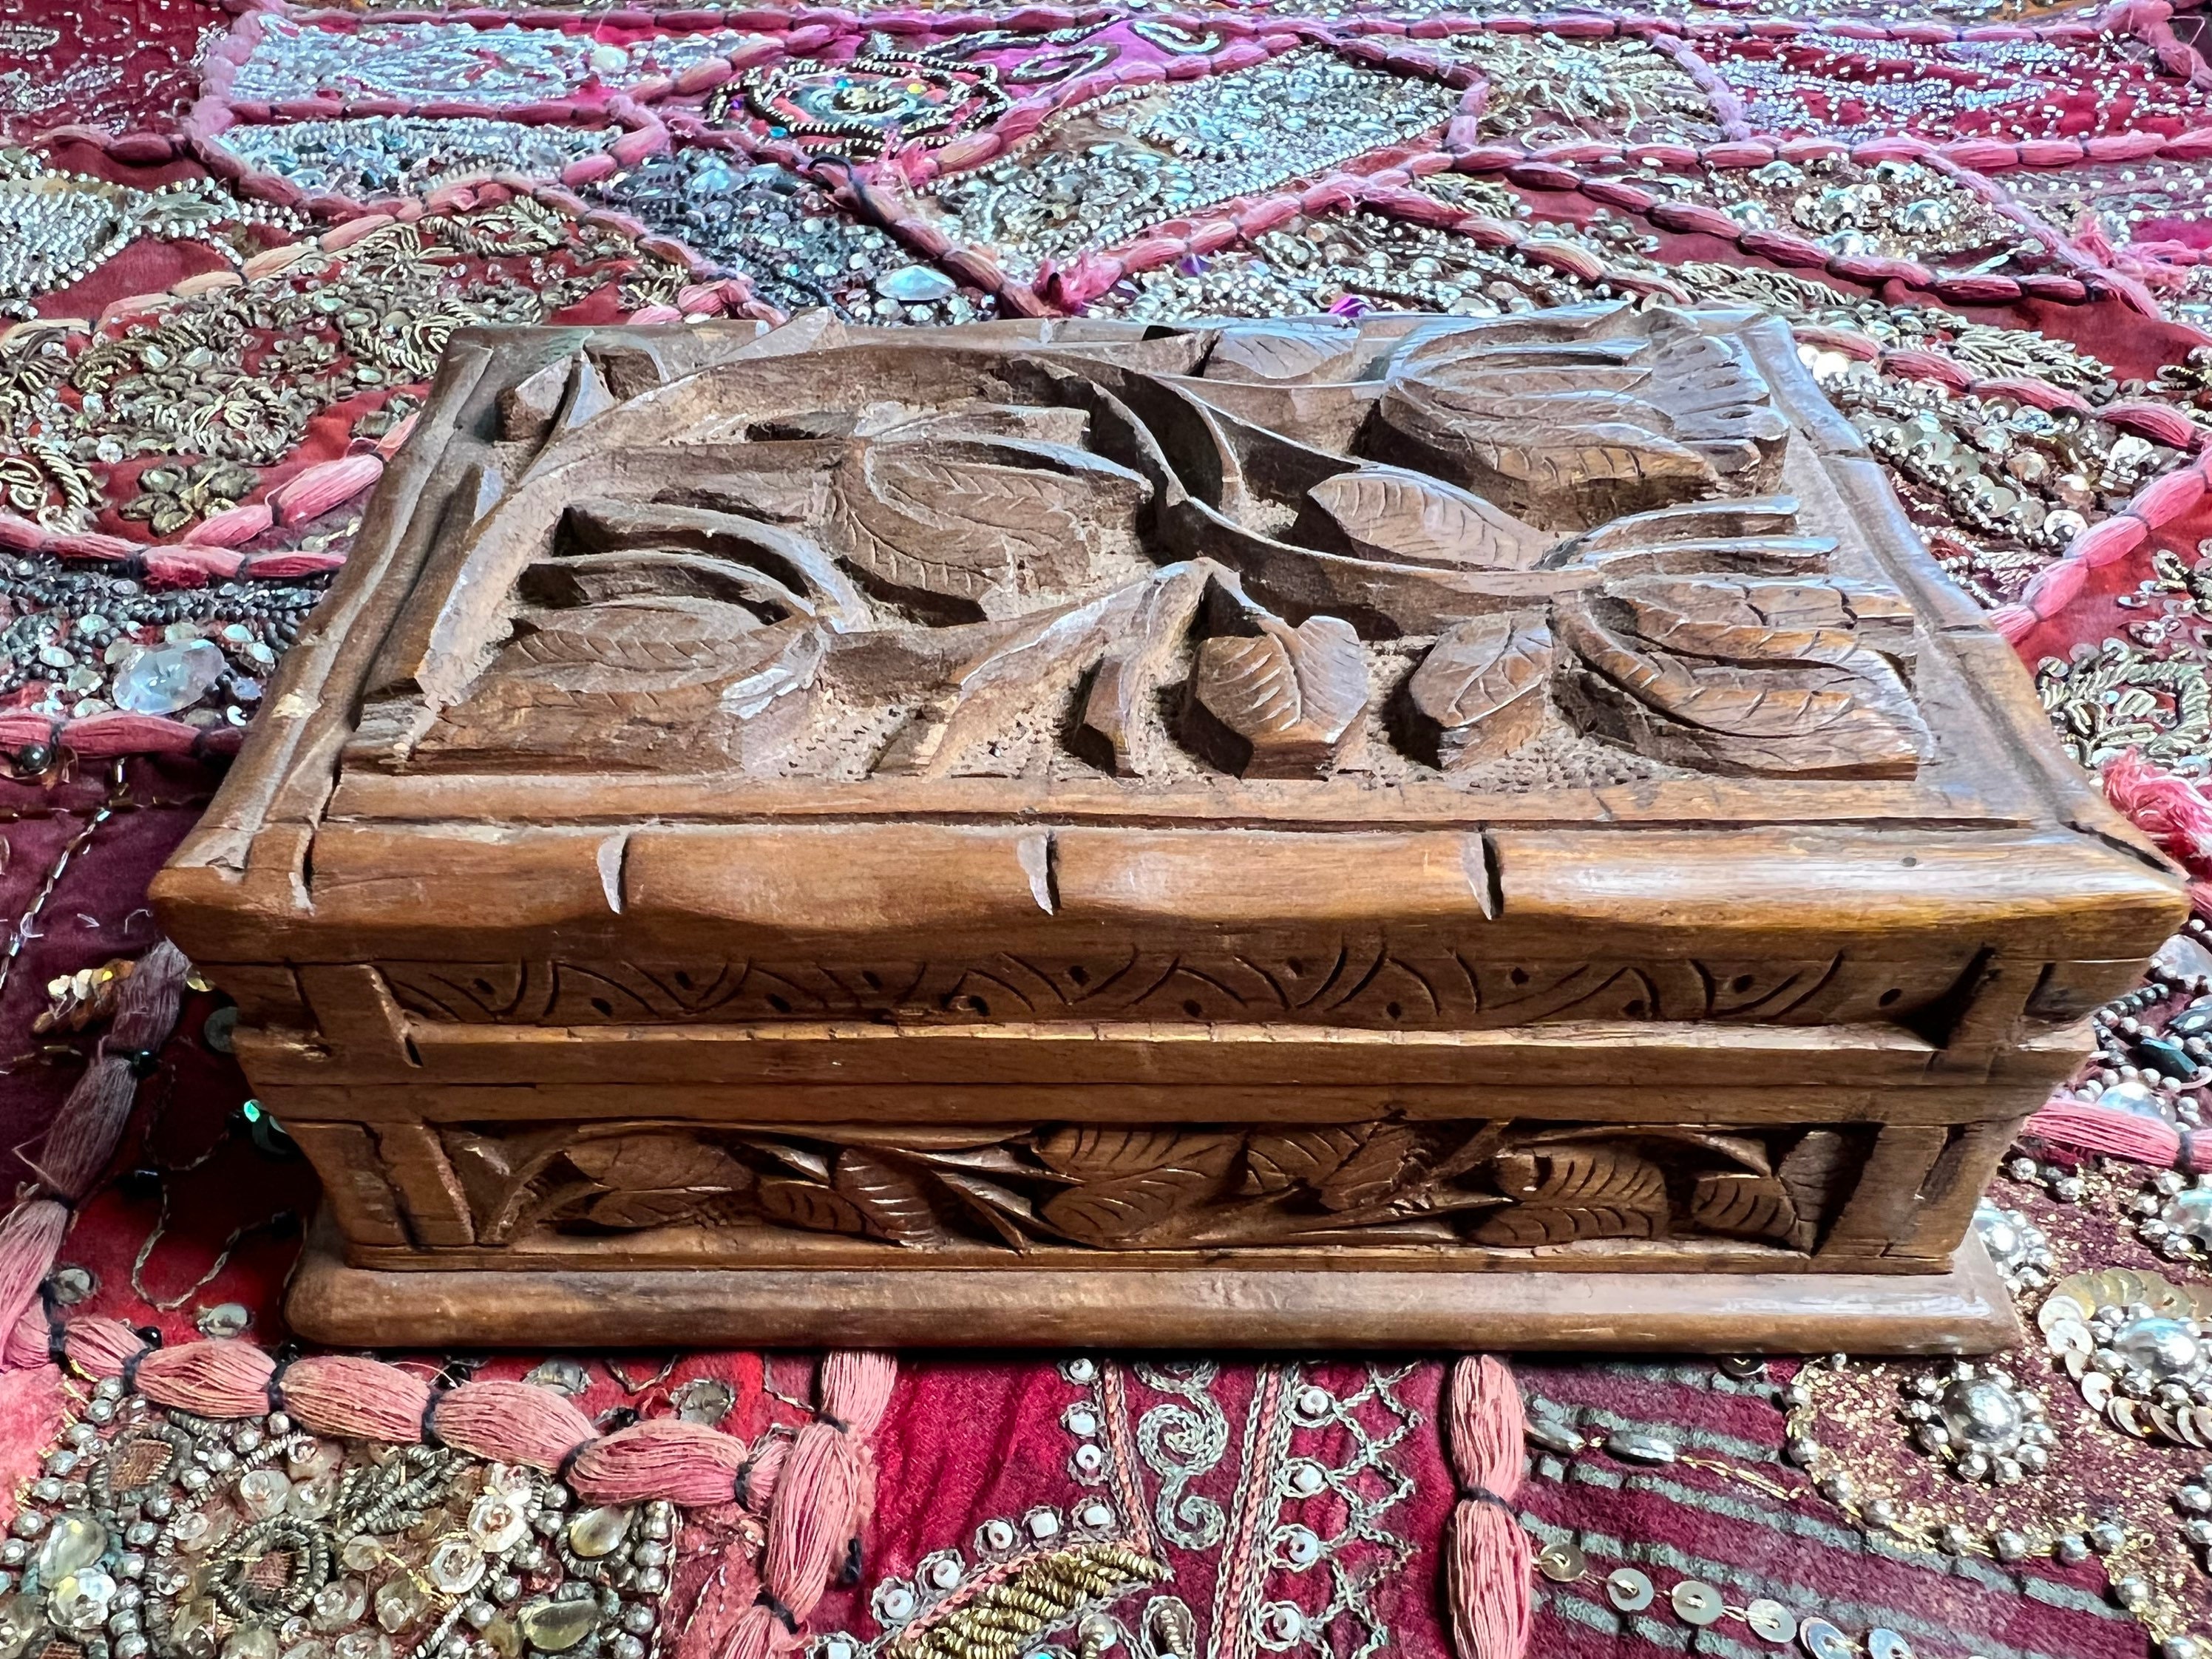 Carved Wooden Box - Etsy